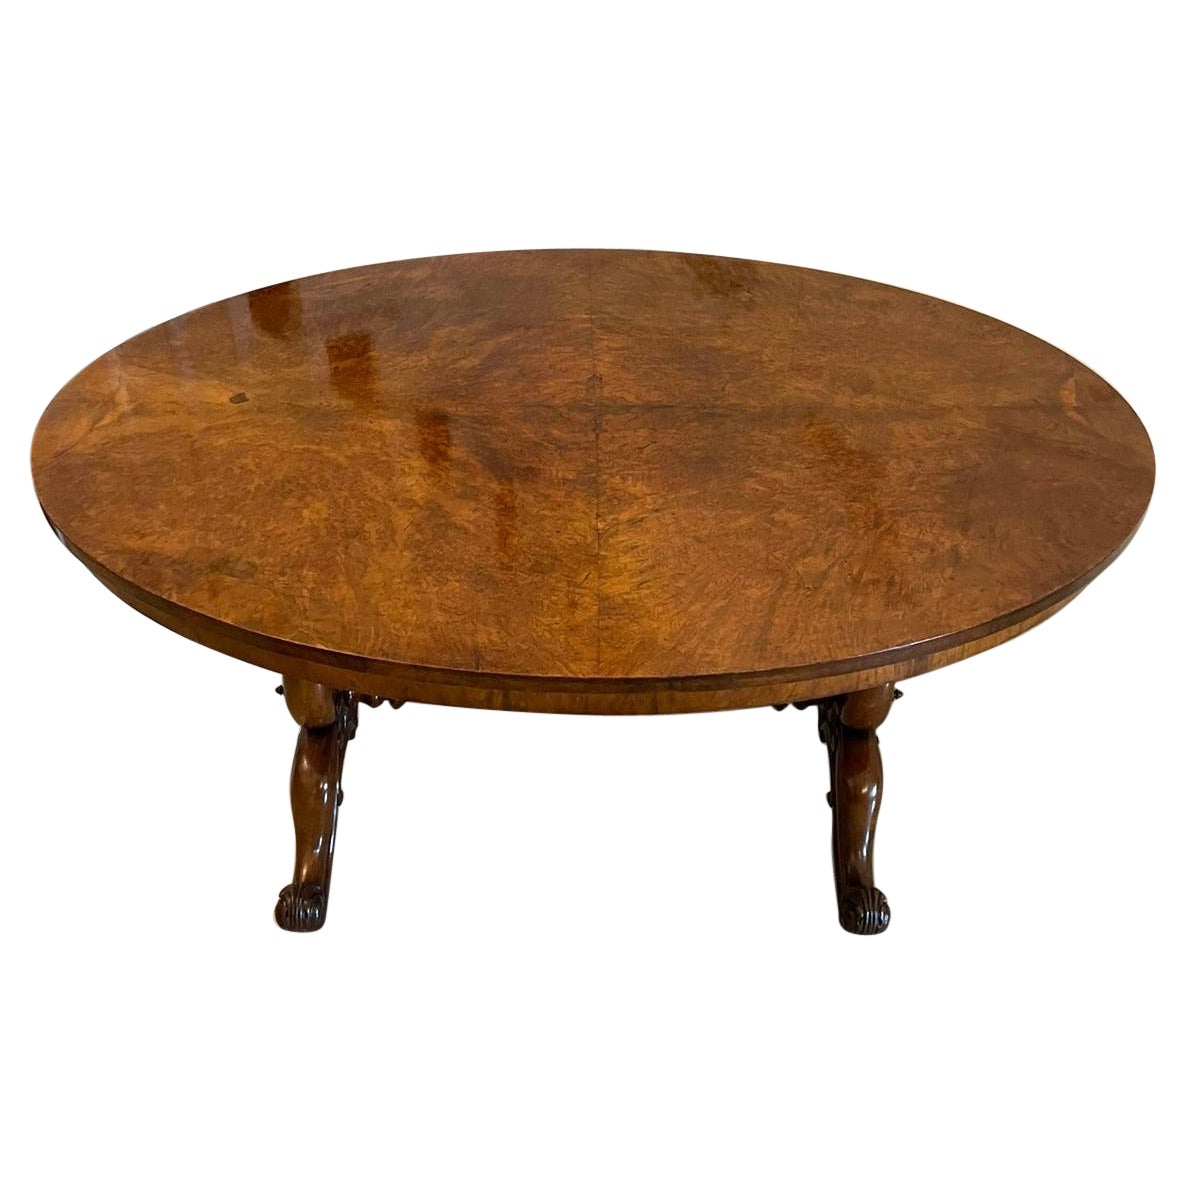 Outstanding Quality Antique Victorian Burr Walnut Centre / Dining Table 